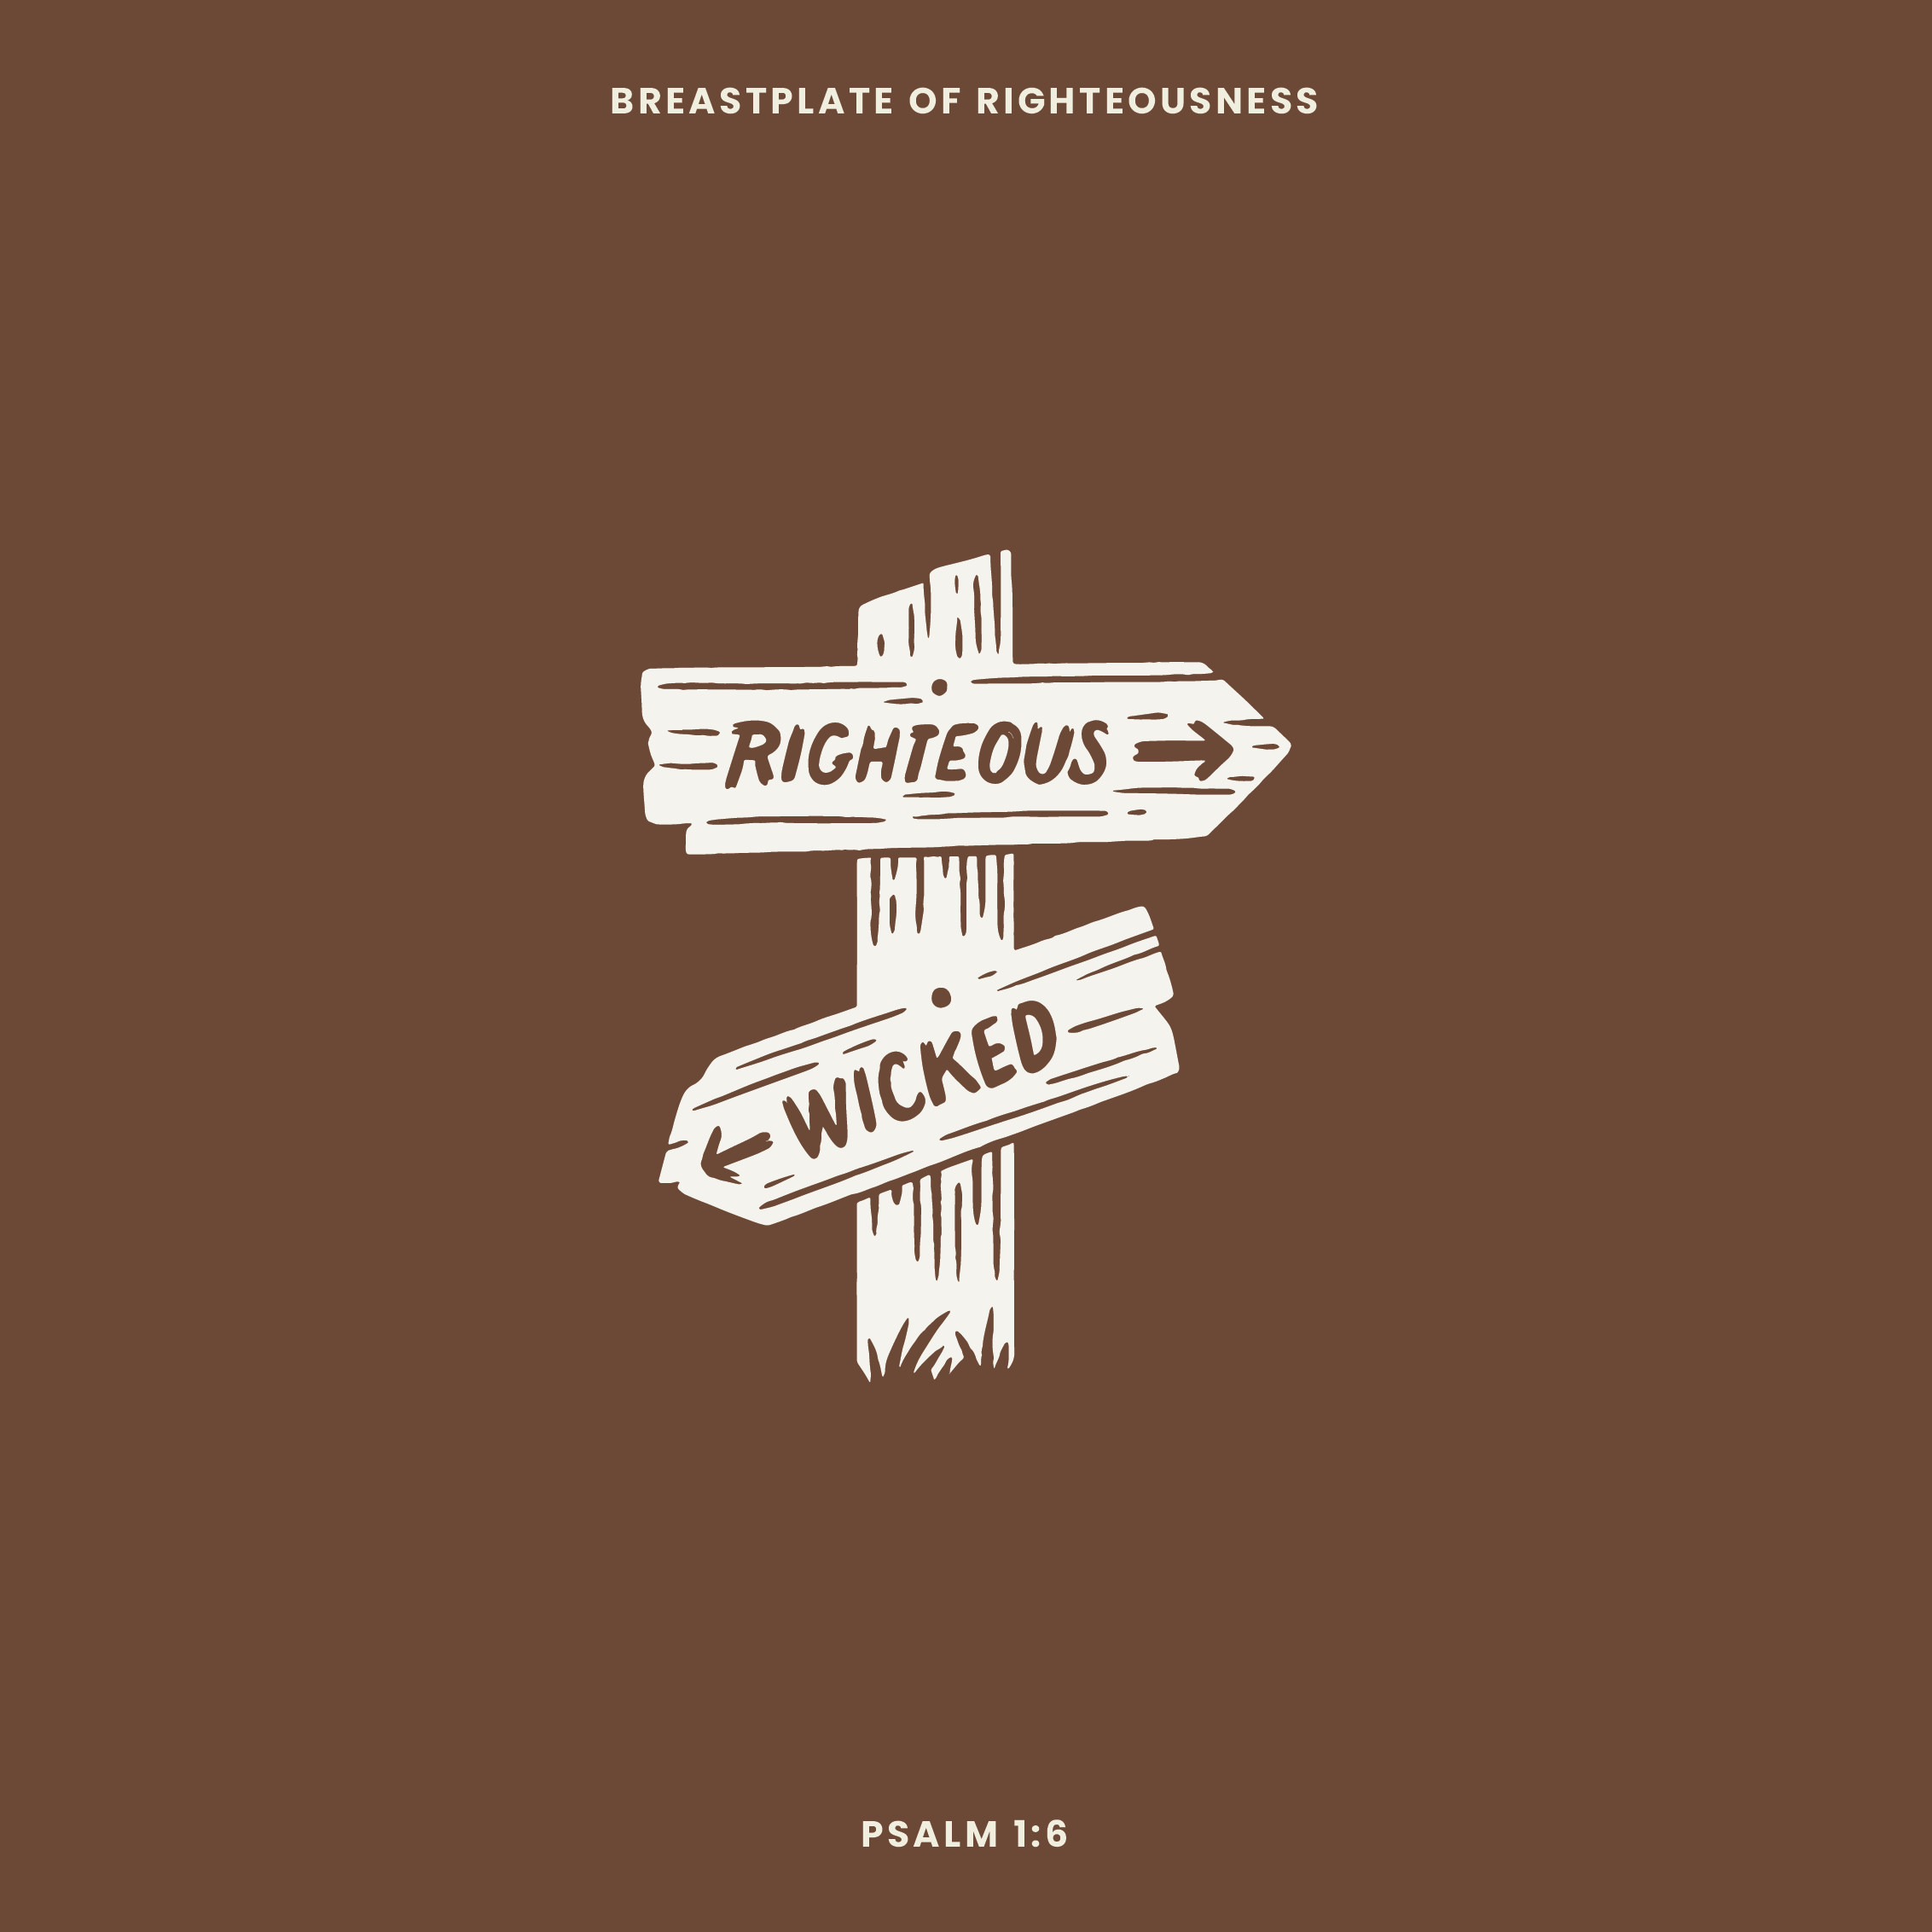 Psalm 1:6 "The Way" (Breastplate of Righteousness - Week 1)